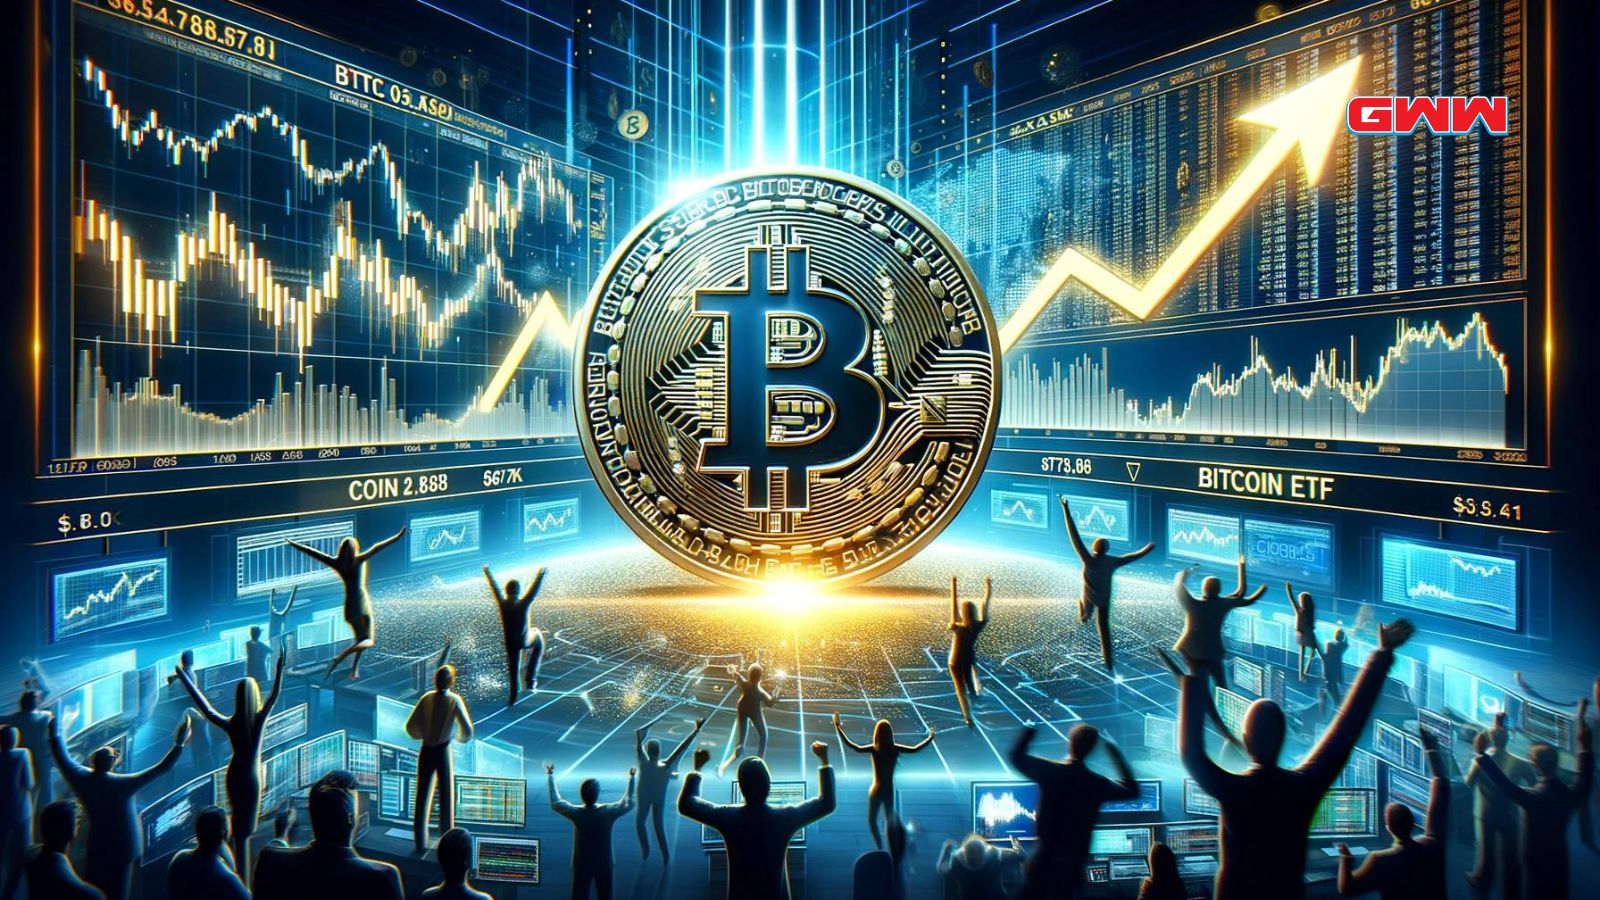 Bitcoin with rising graph, celebrating traders, digital market background